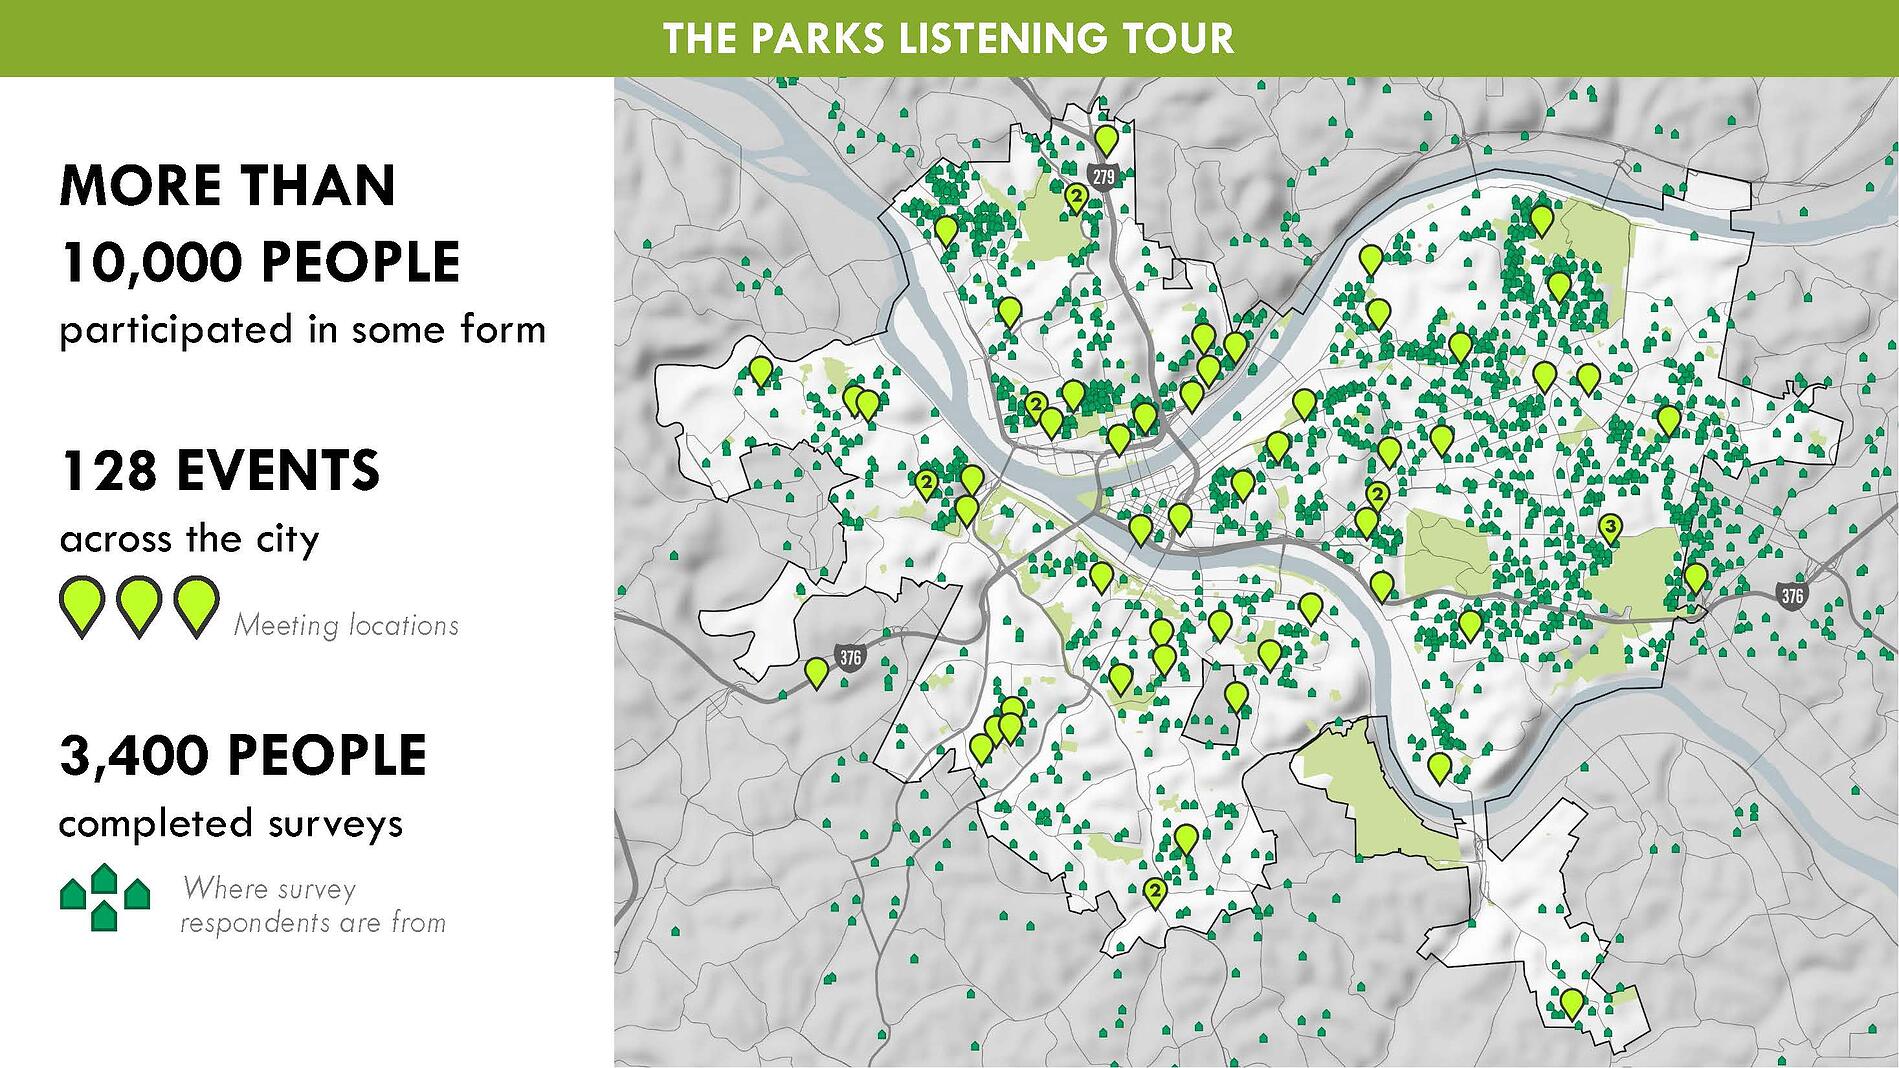 The Parks Listening Tour map